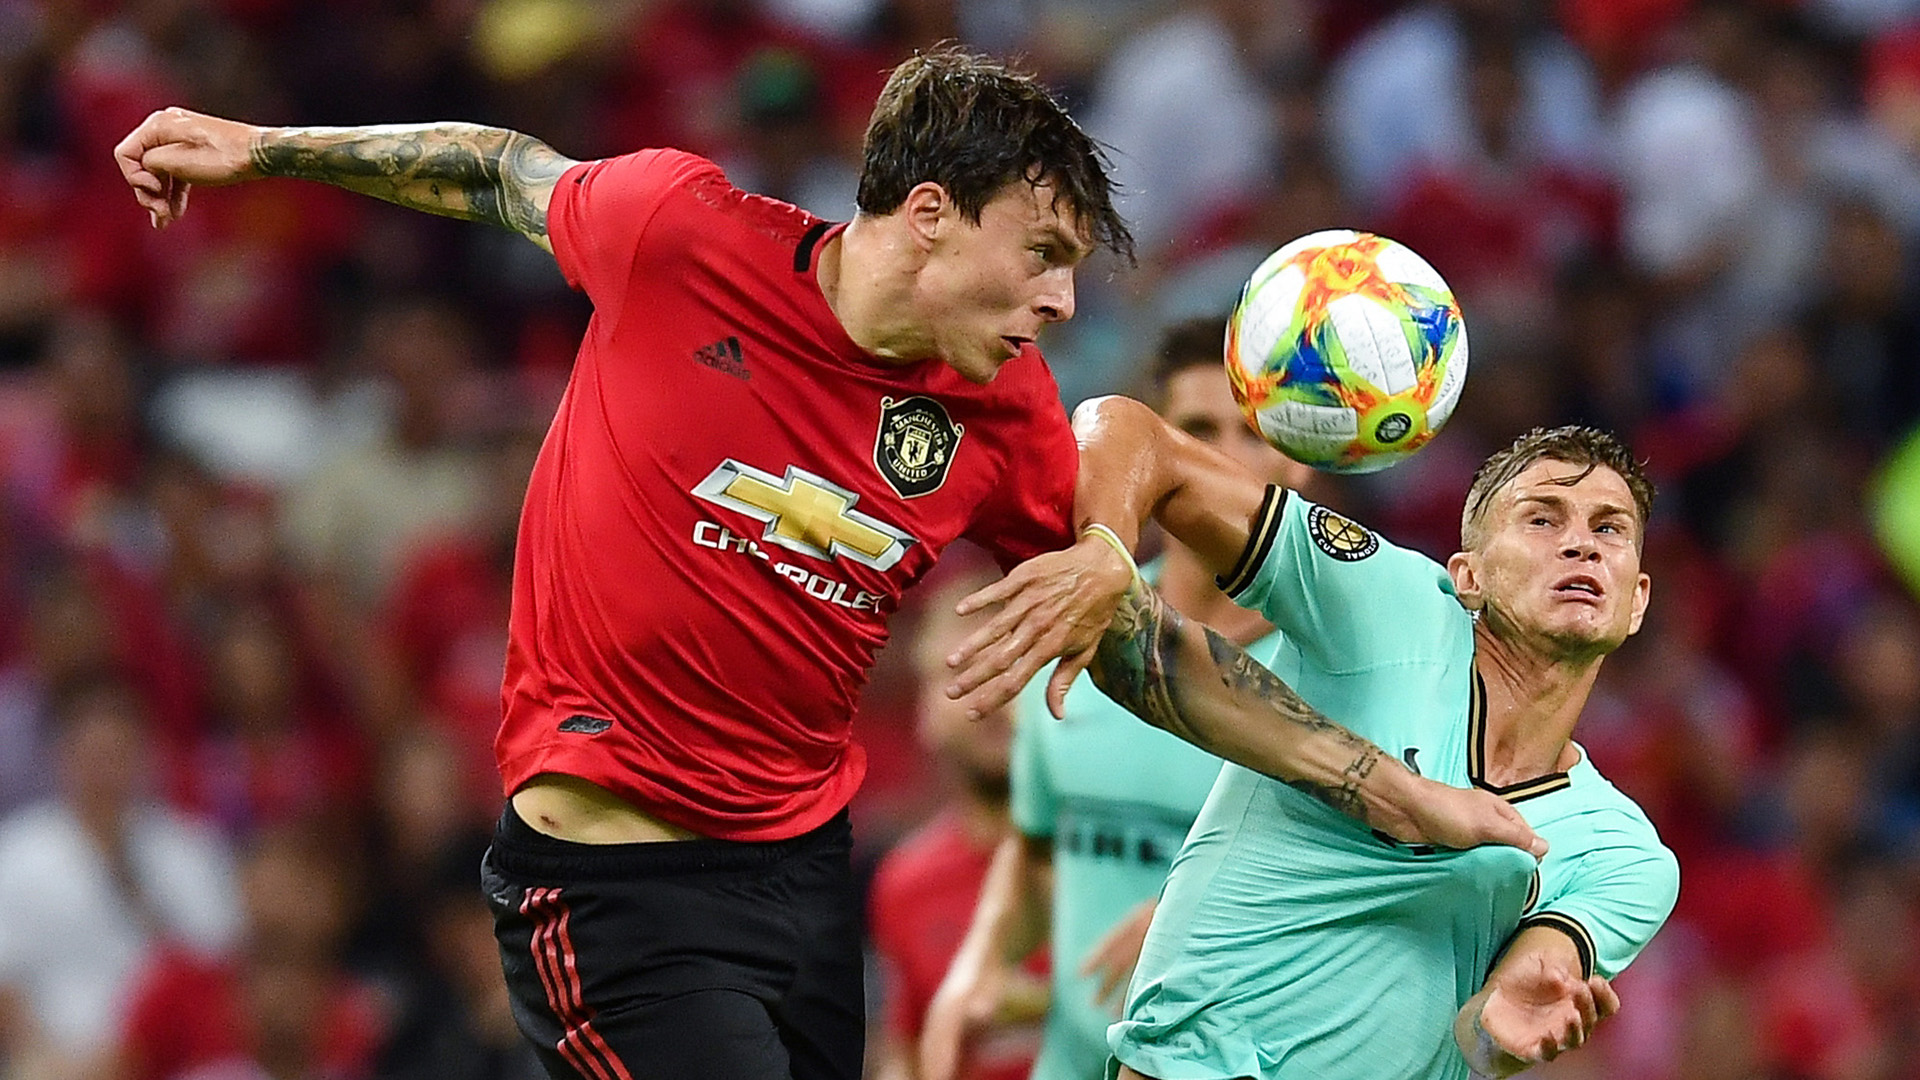 Injury scare for Man Utd as Lindelof heads straight for tunnel after being subbed in Inter game